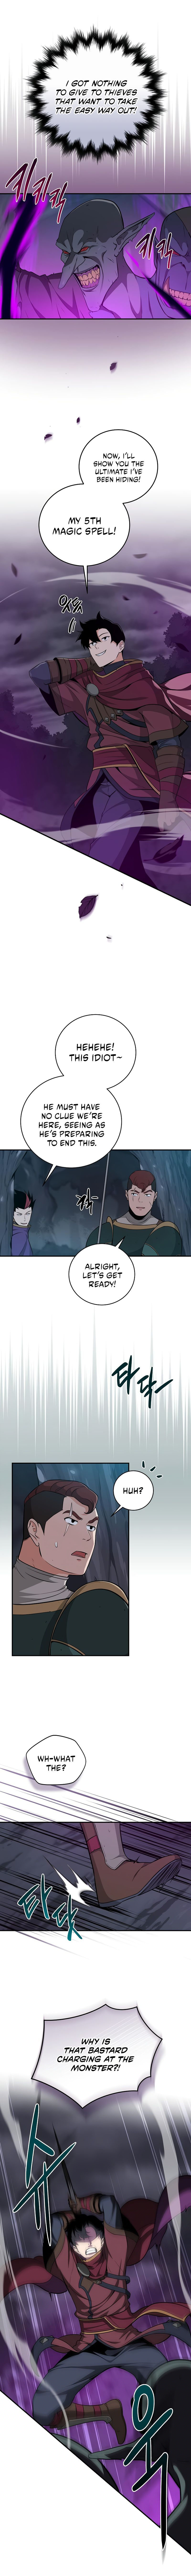 Archmage Streamer - Chapter 21 Page 6